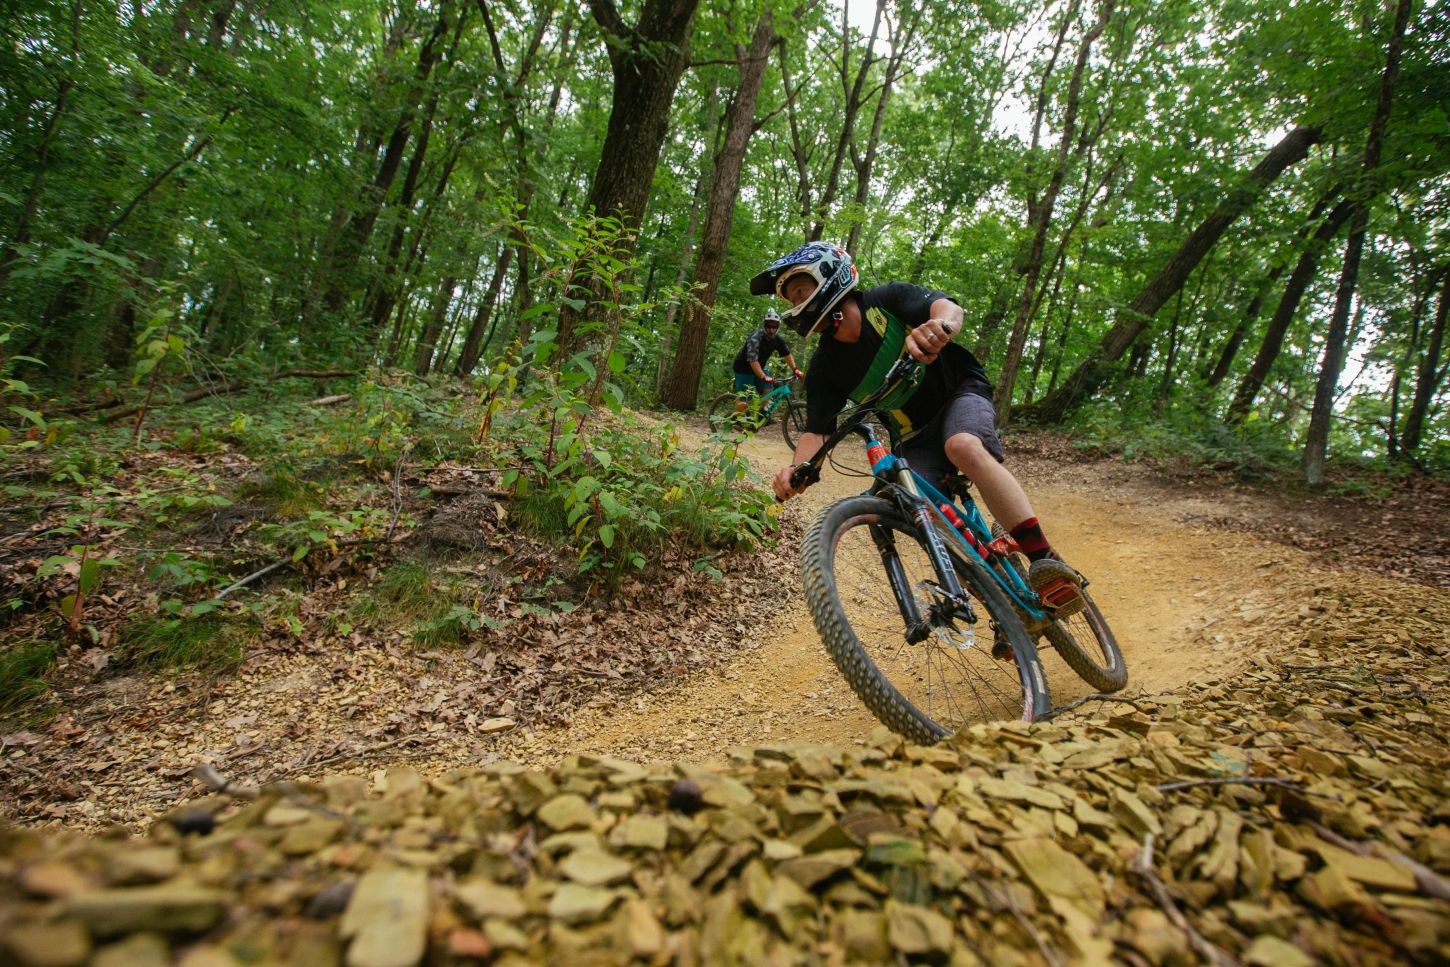 Tannery Knobs Mountain Bike Park in Johnson City, Tennessee